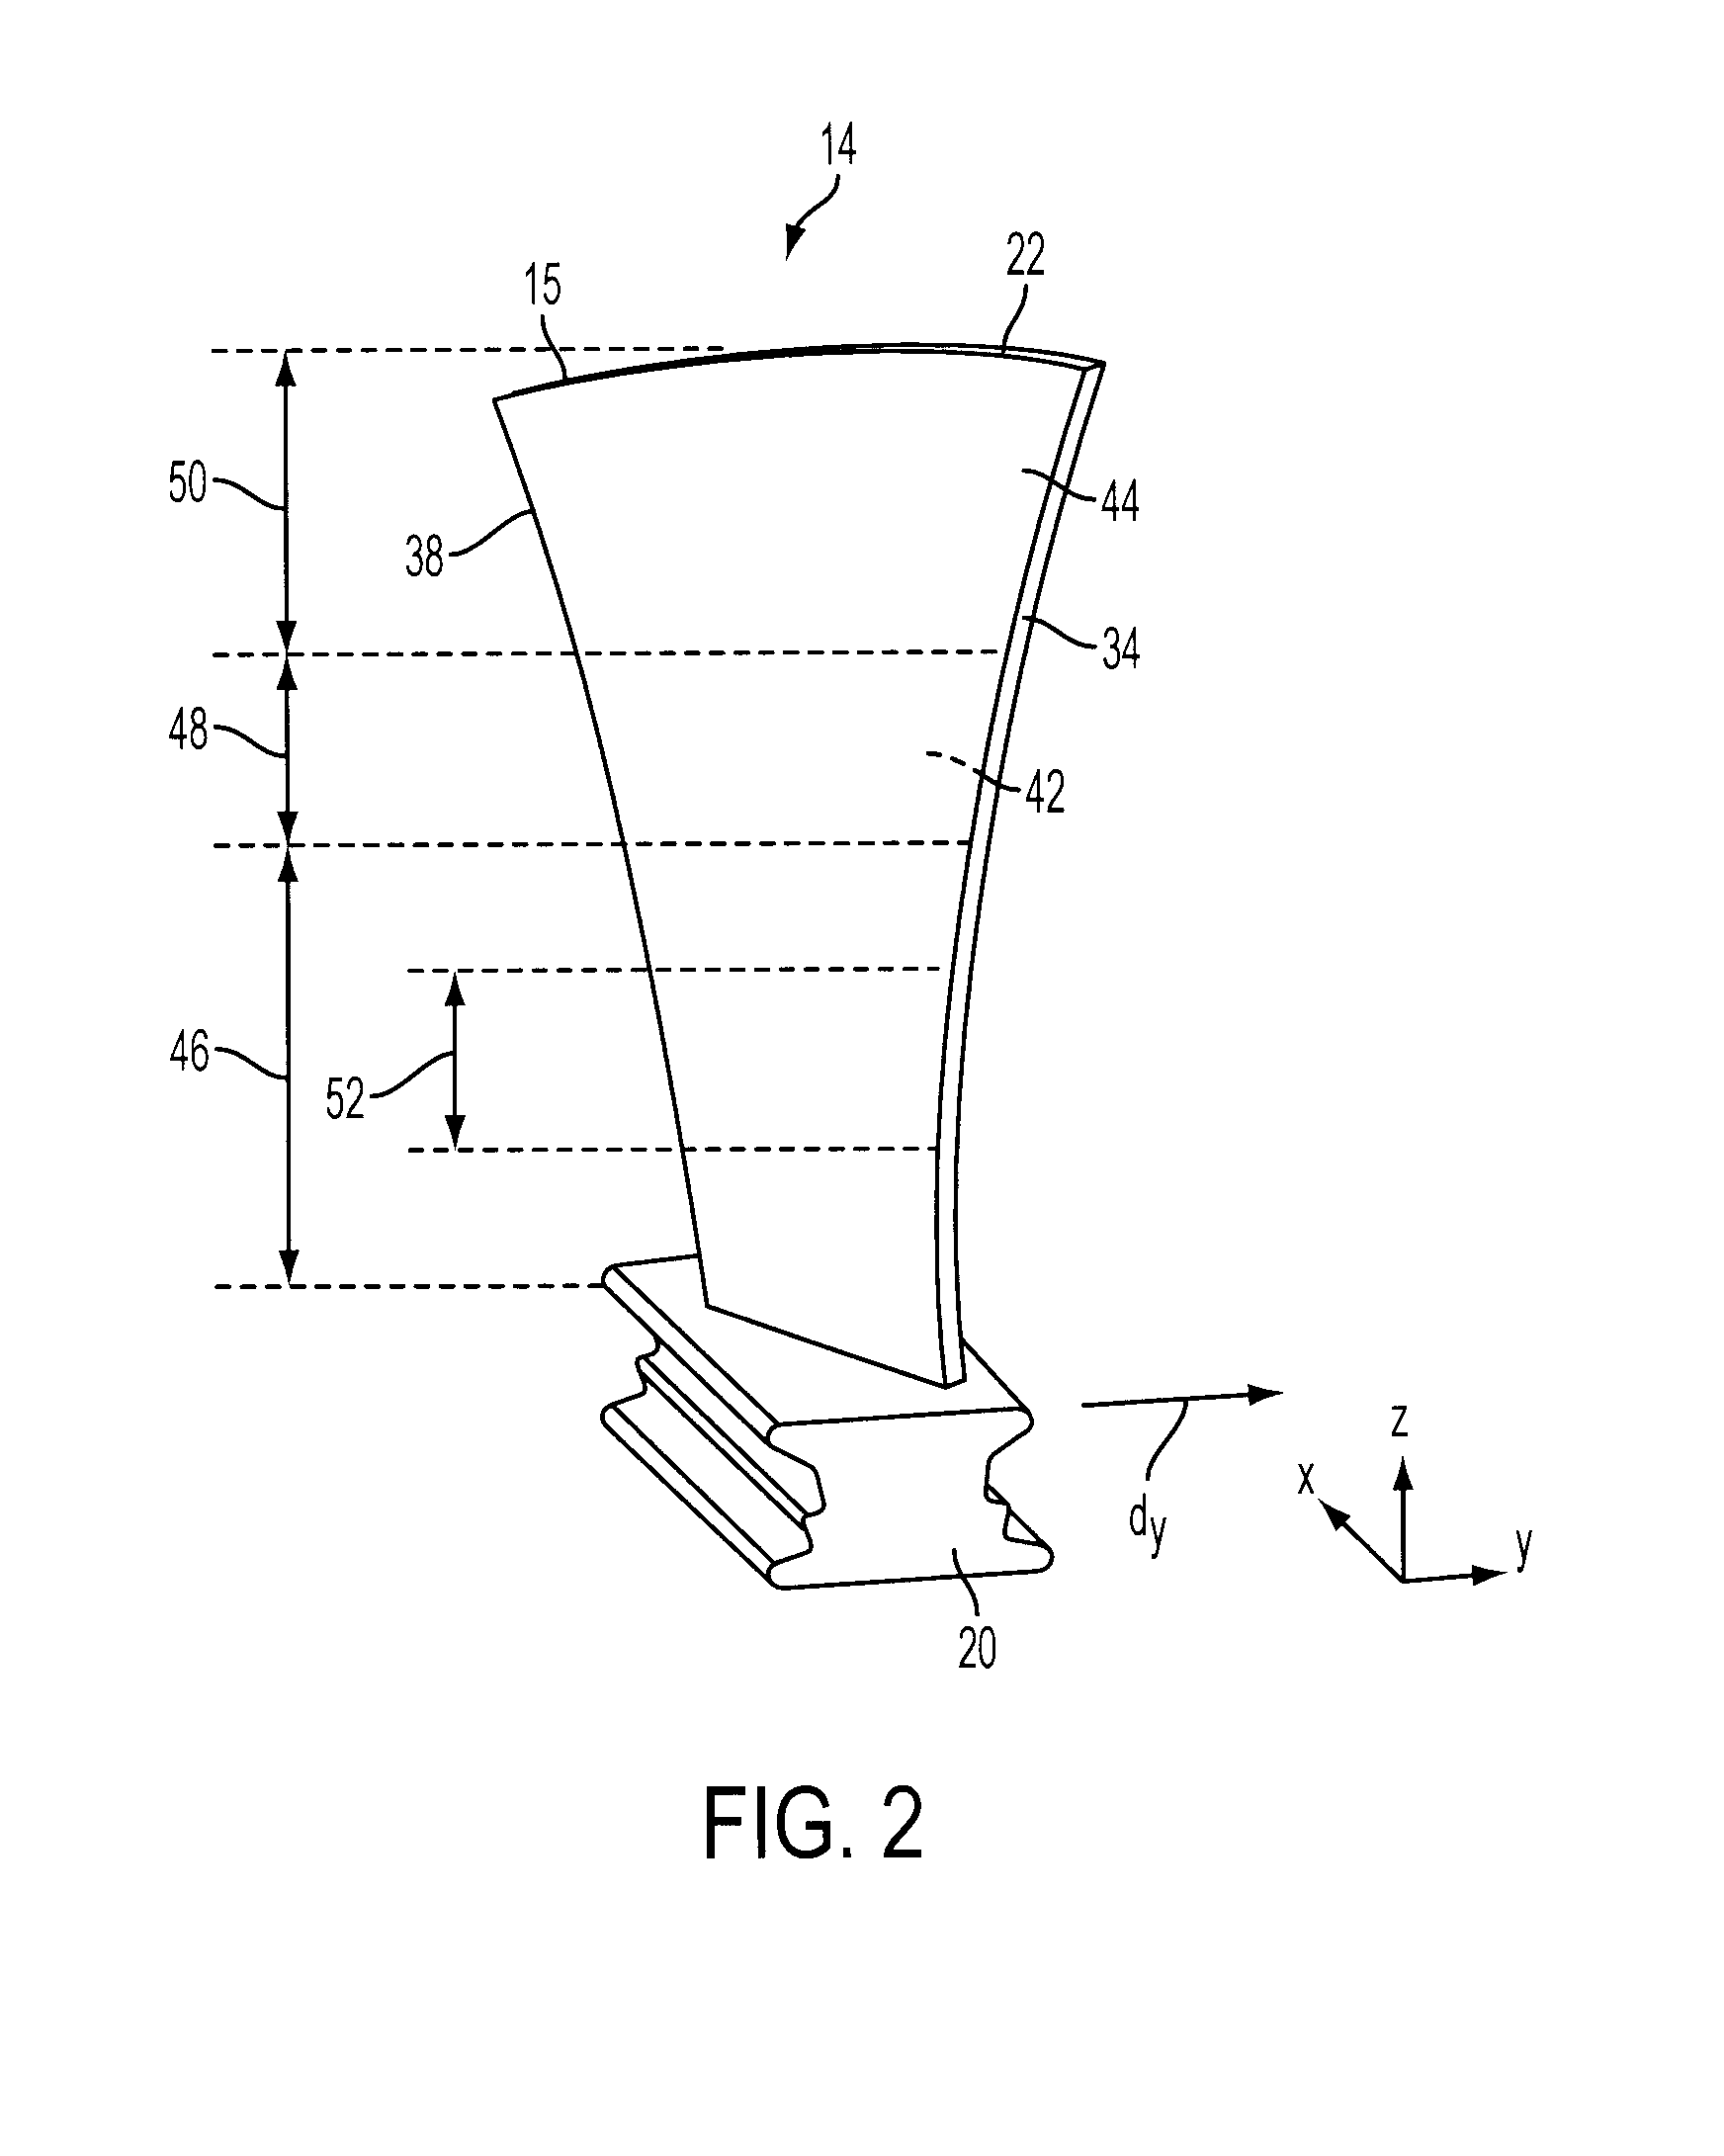 Compressor blade with forward sweep and dihedral